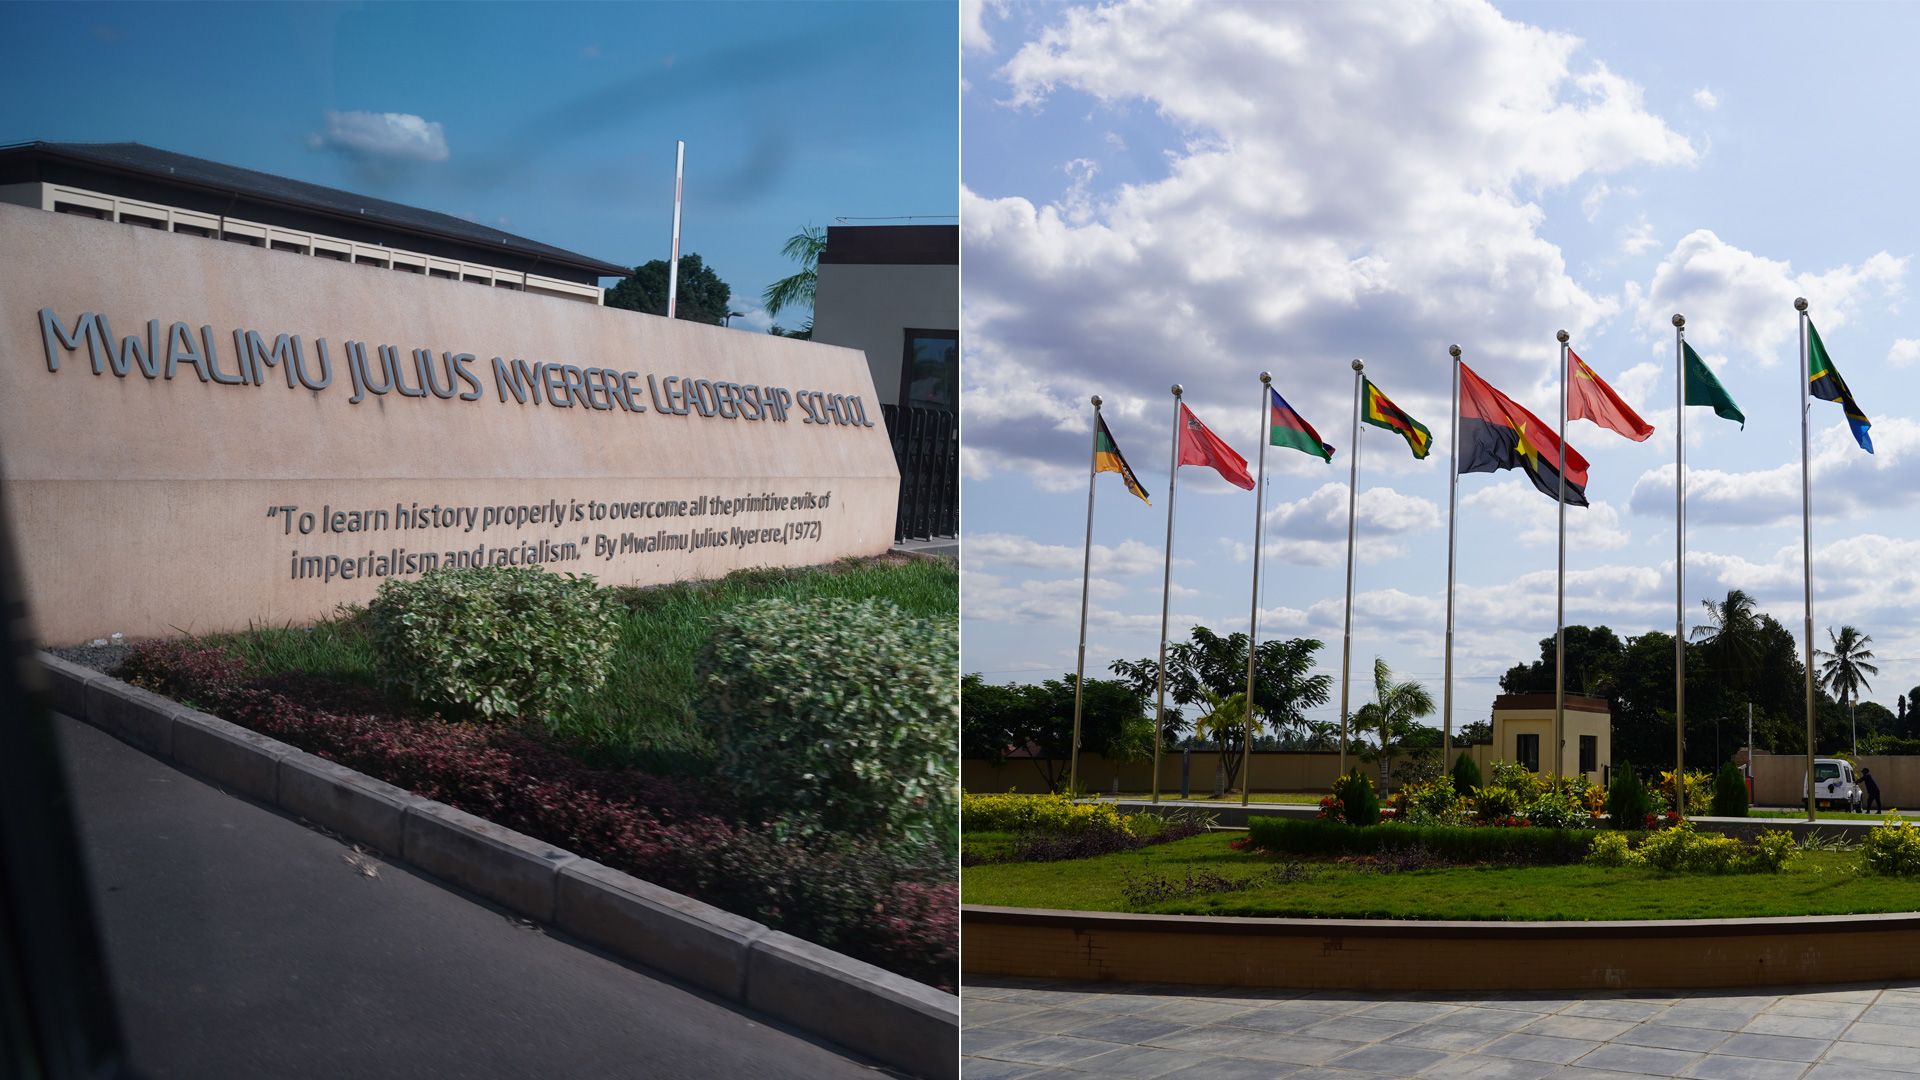  A photo collage showing the gated entrance to the school with the school’s name on it and a photo of the 8 flags flying in front of the school.